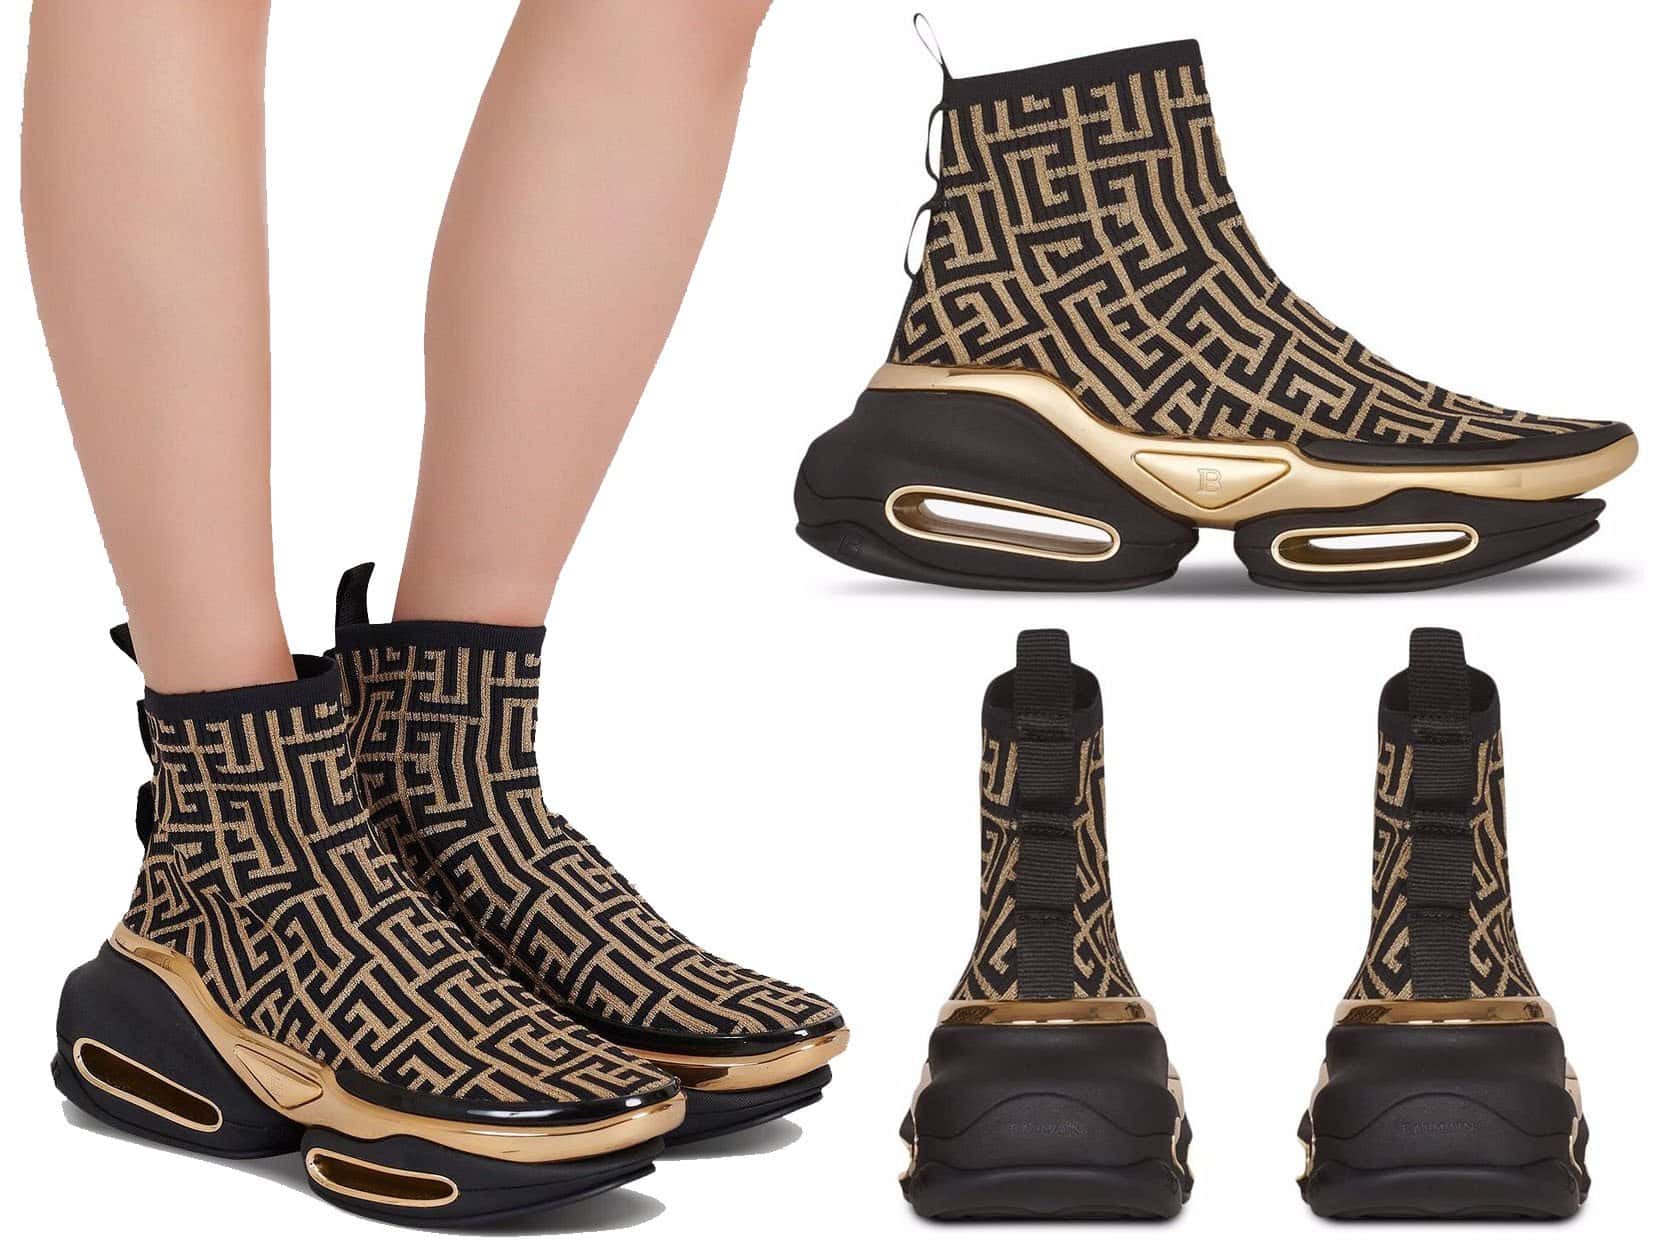 Balmain's futuristic sneakers, the B-Bold monogram knitted slip-on sneakers have sculpted platforms and are included in the brand's Spring/Summer 2022 collection in a black and gold iteration